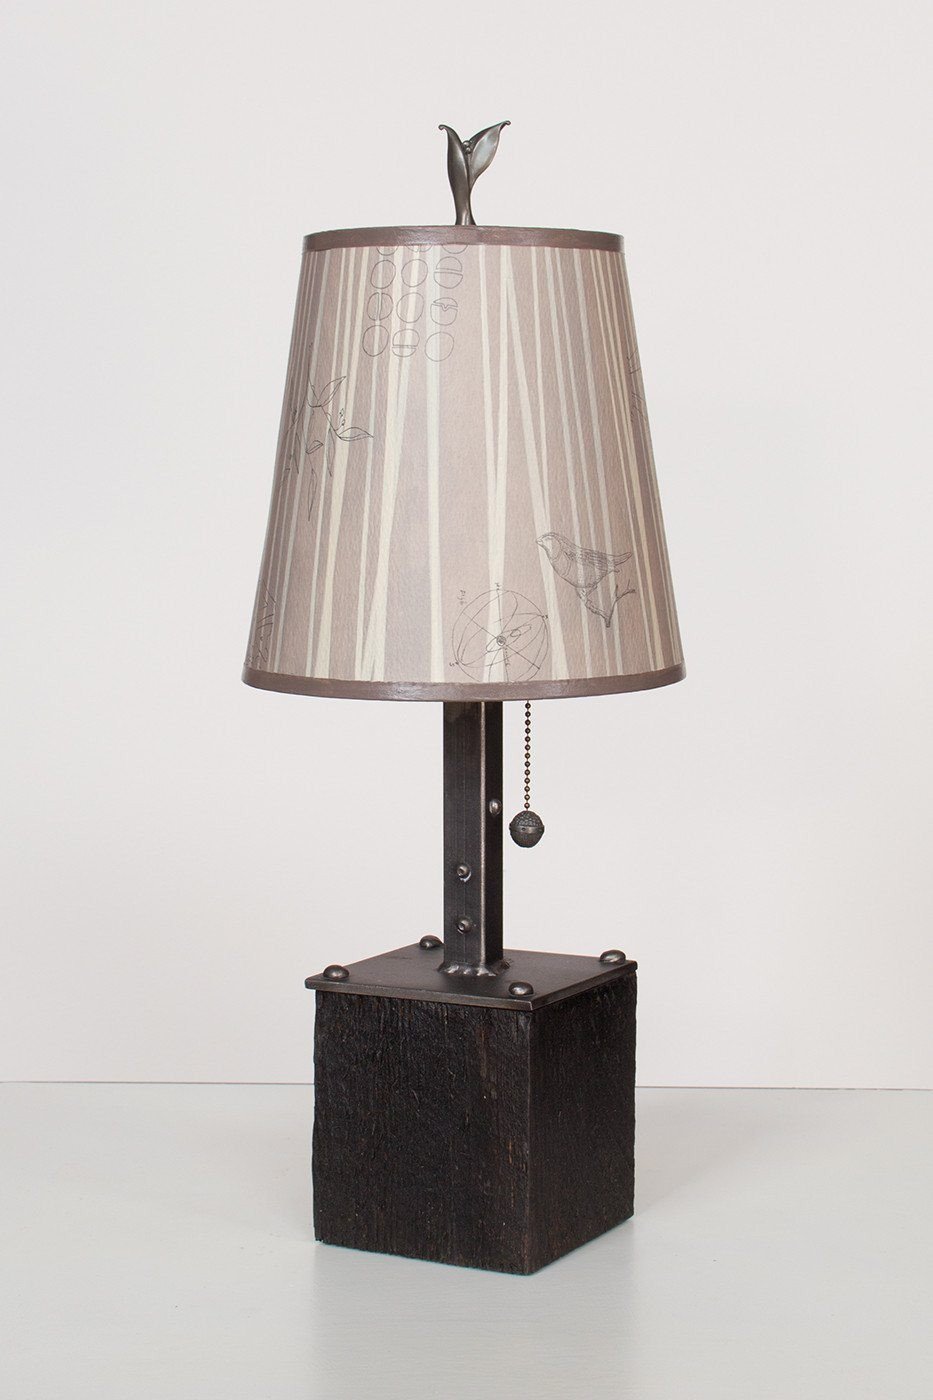 Steel Table Lamp on Reclaimed Wood with Small Drum Shade in Birch Lit